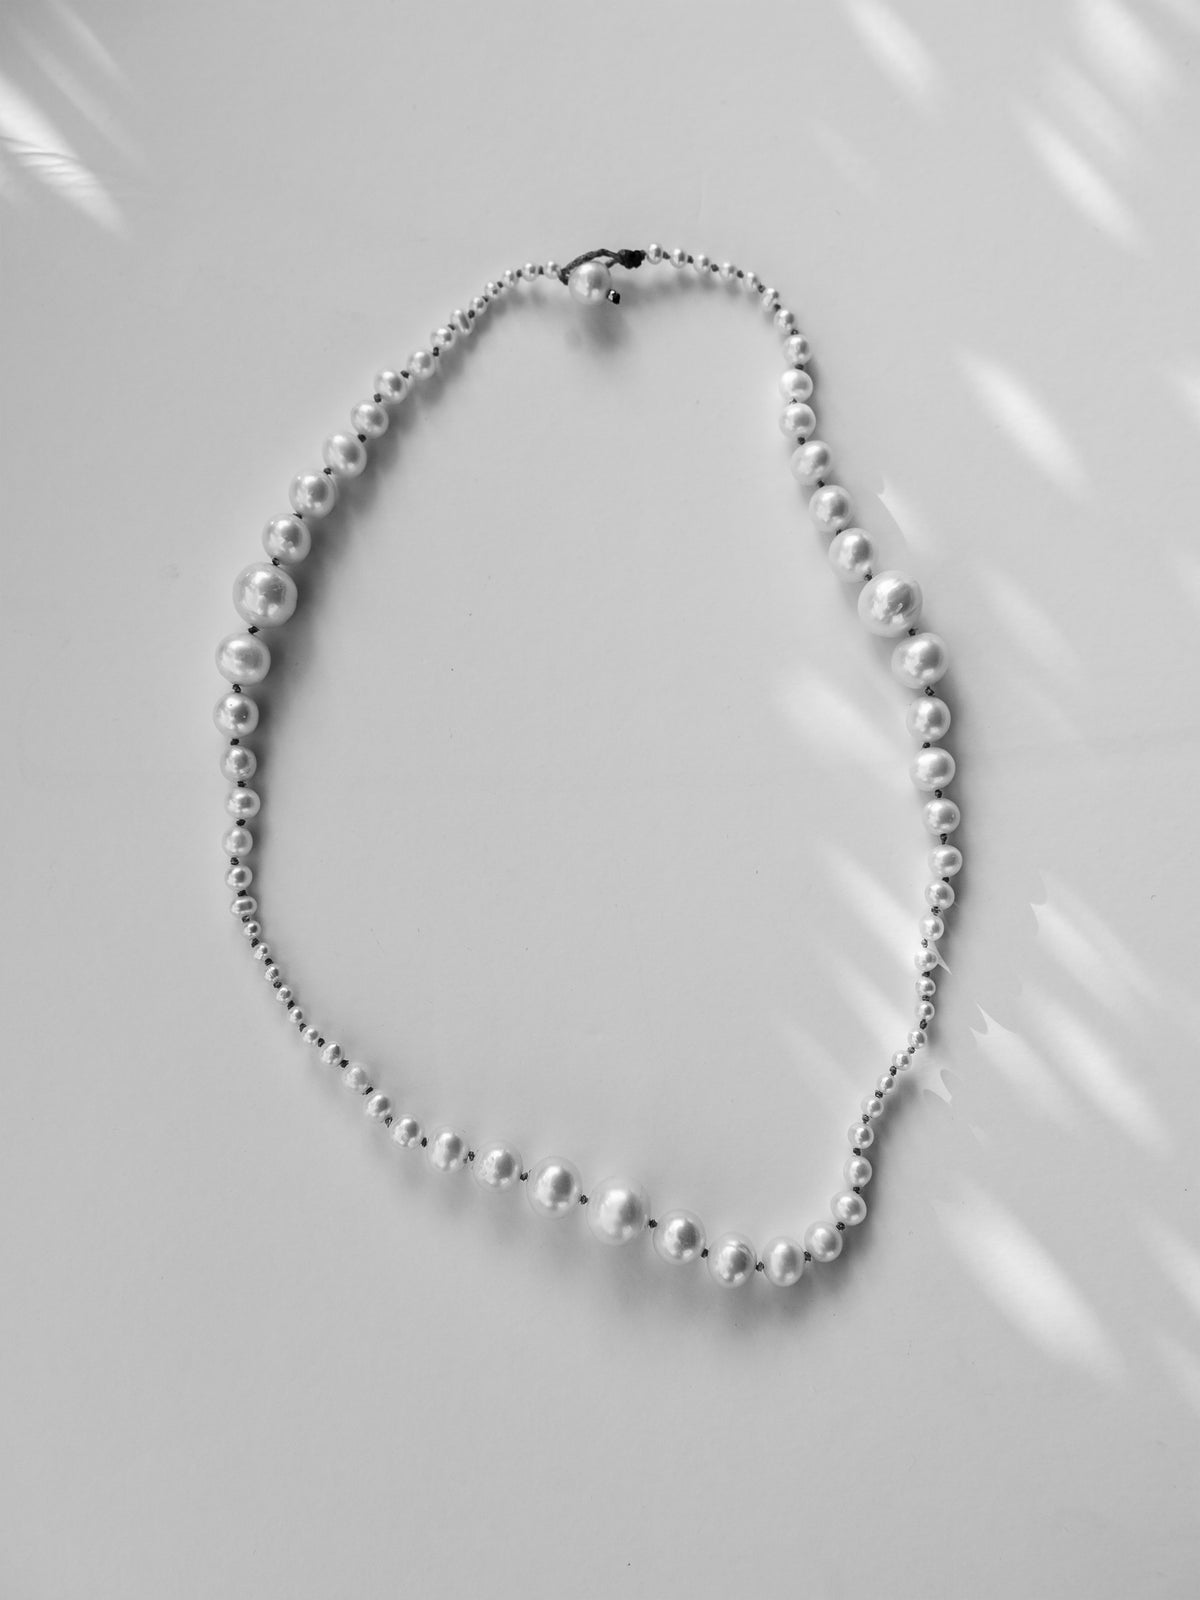 MARICHELLE | PEARL NECKLACE LONG, BLACK CORD